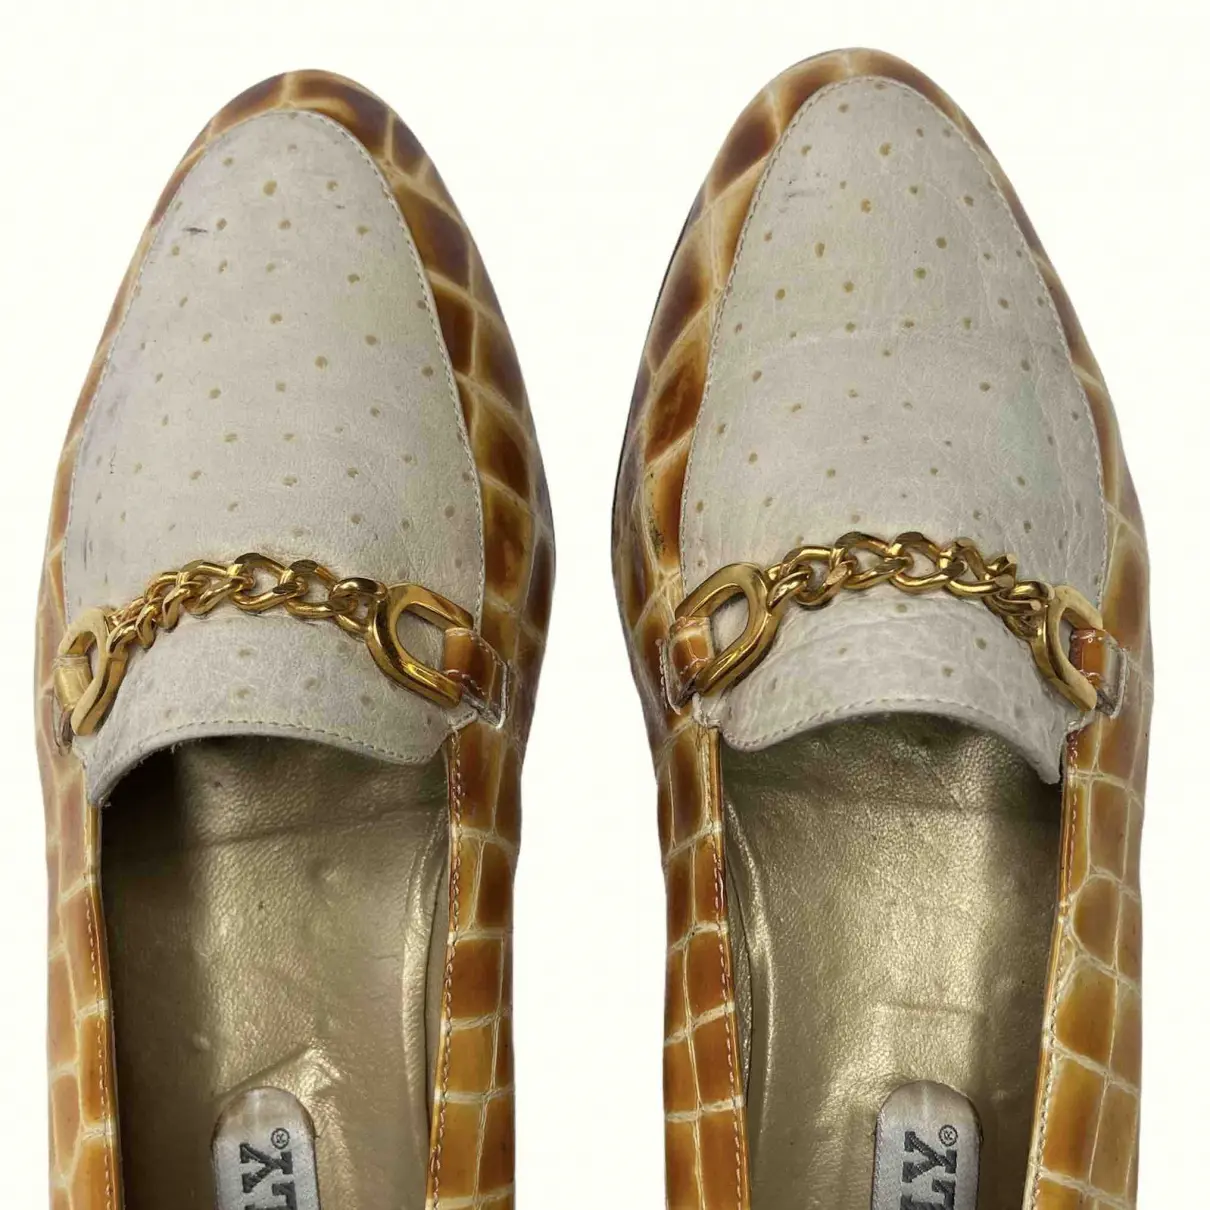 Buy Bally Leather flats online